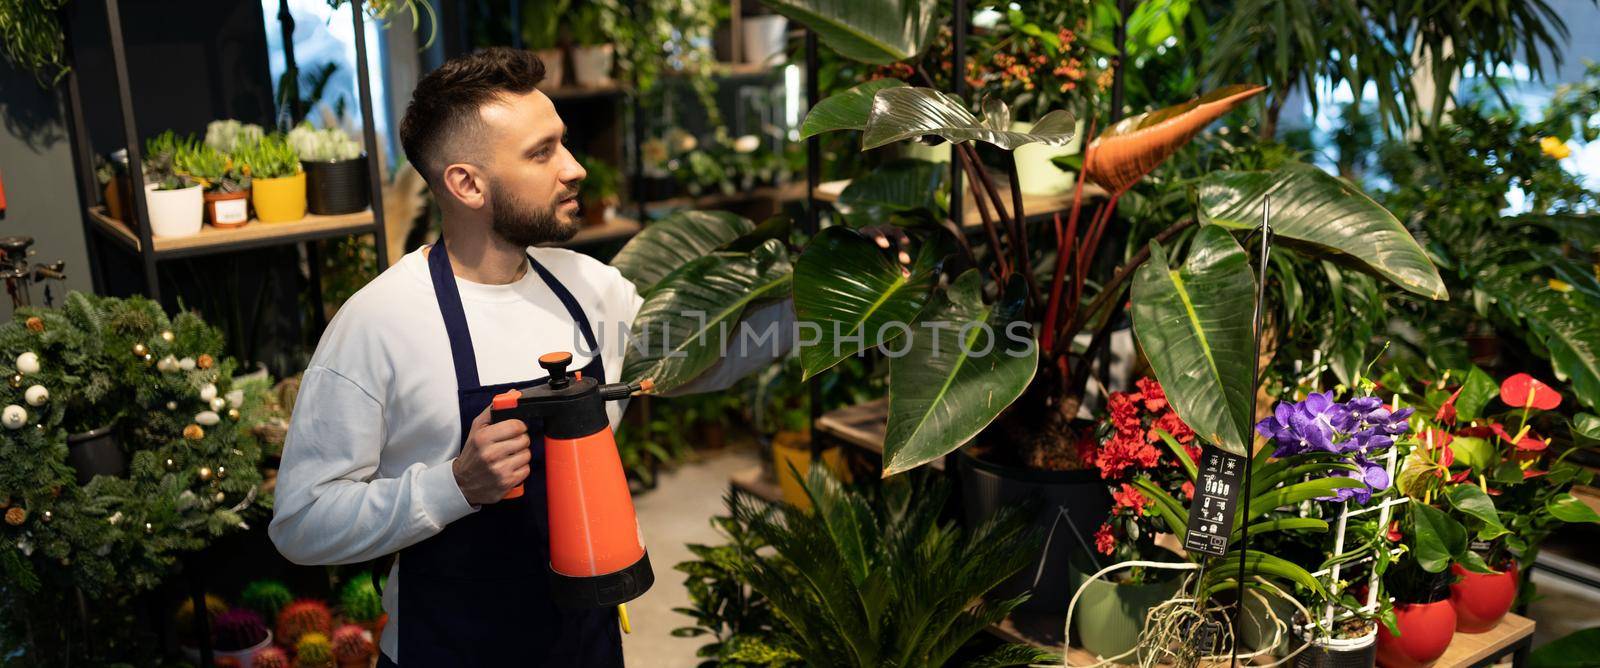 male florist In the garden center takes care of potted plants by spraying them from a spray bottle.